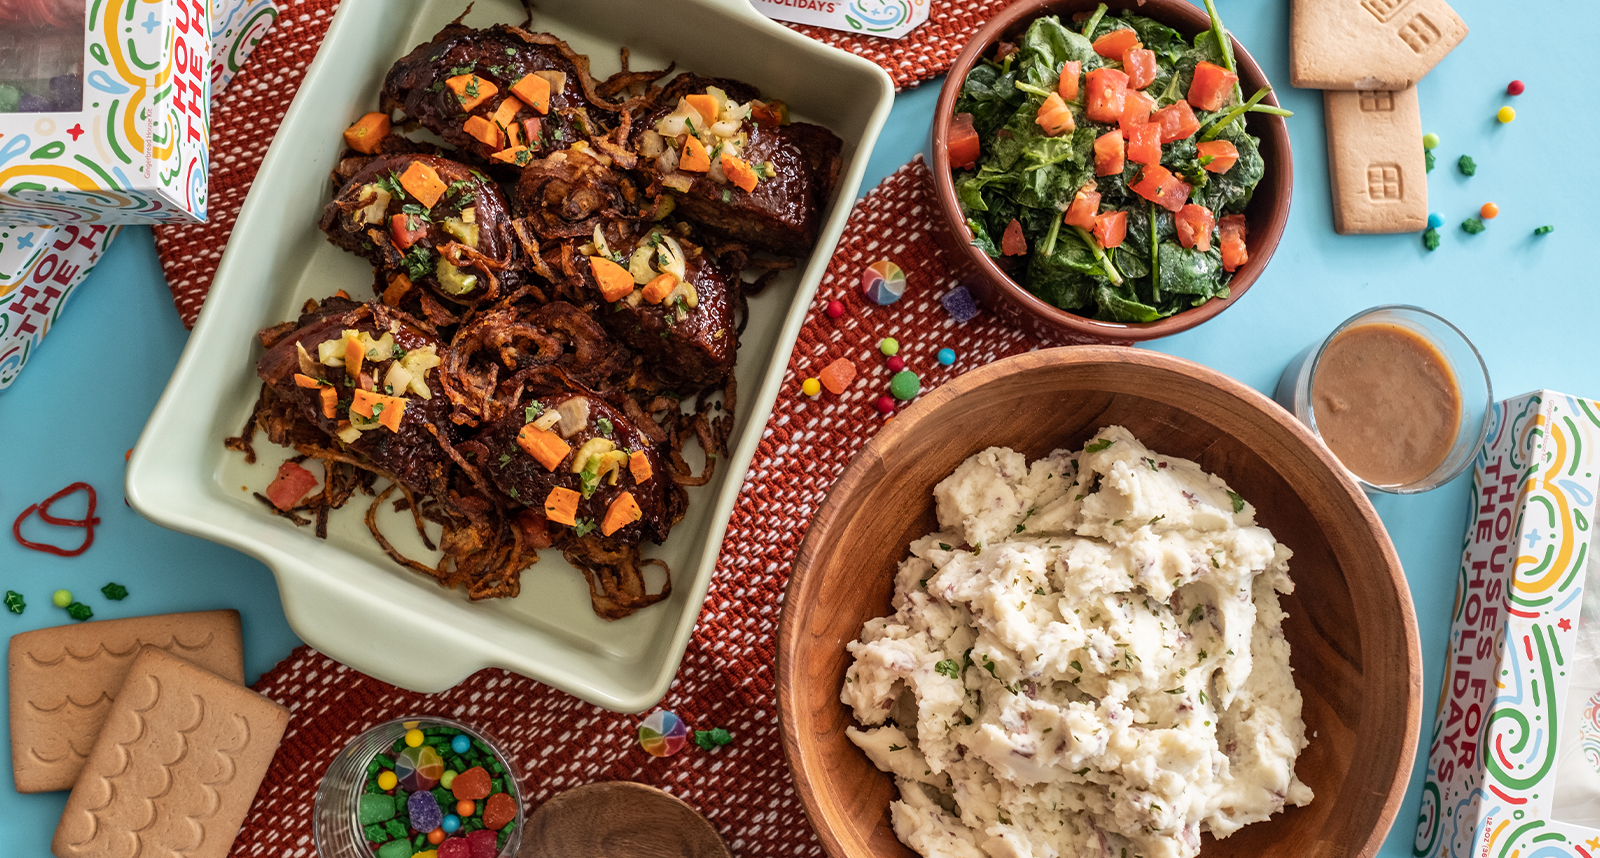 Friends + Family Meals from Lazy Dog Restaurant